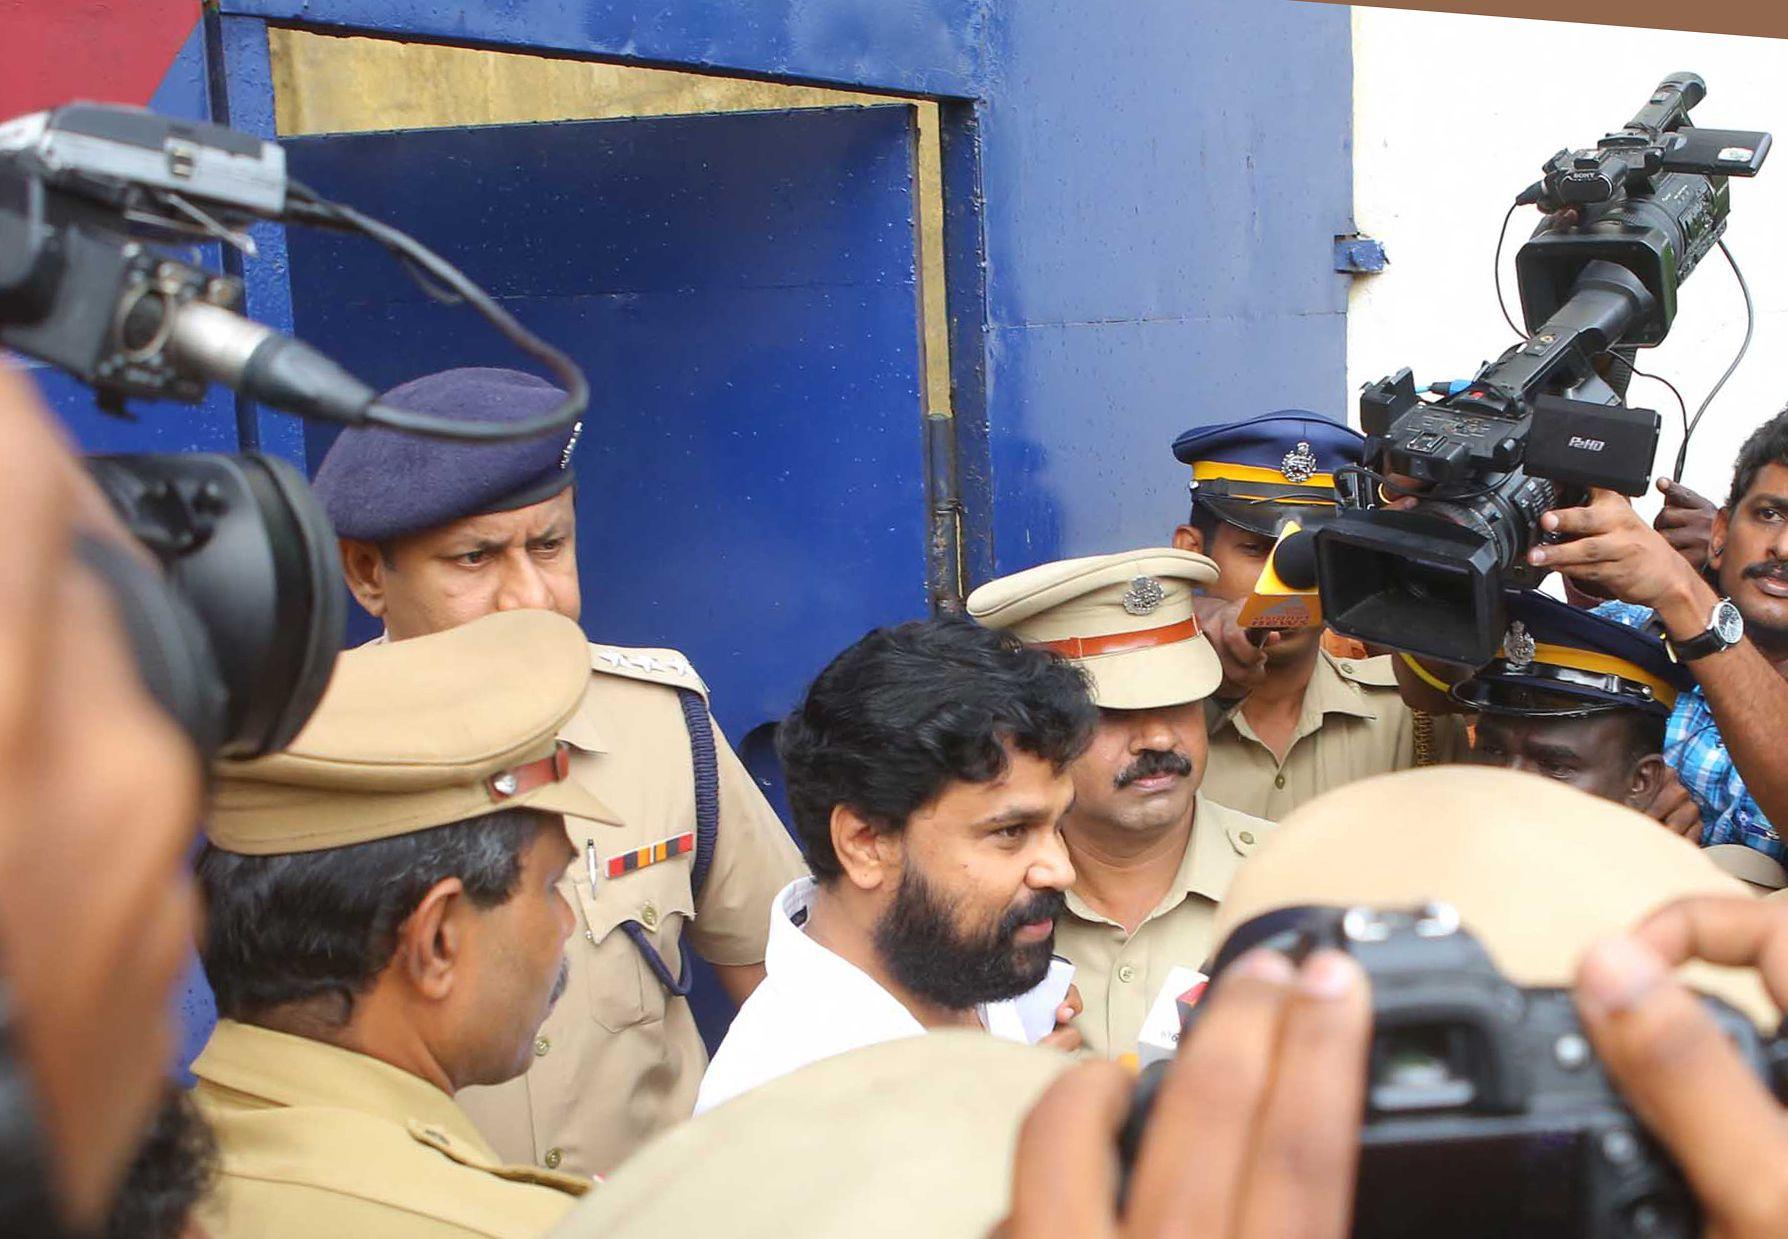 Kerala actress abduction case: Actor Dileep granted bail, steps out of prison after 85 days to cheering crowd